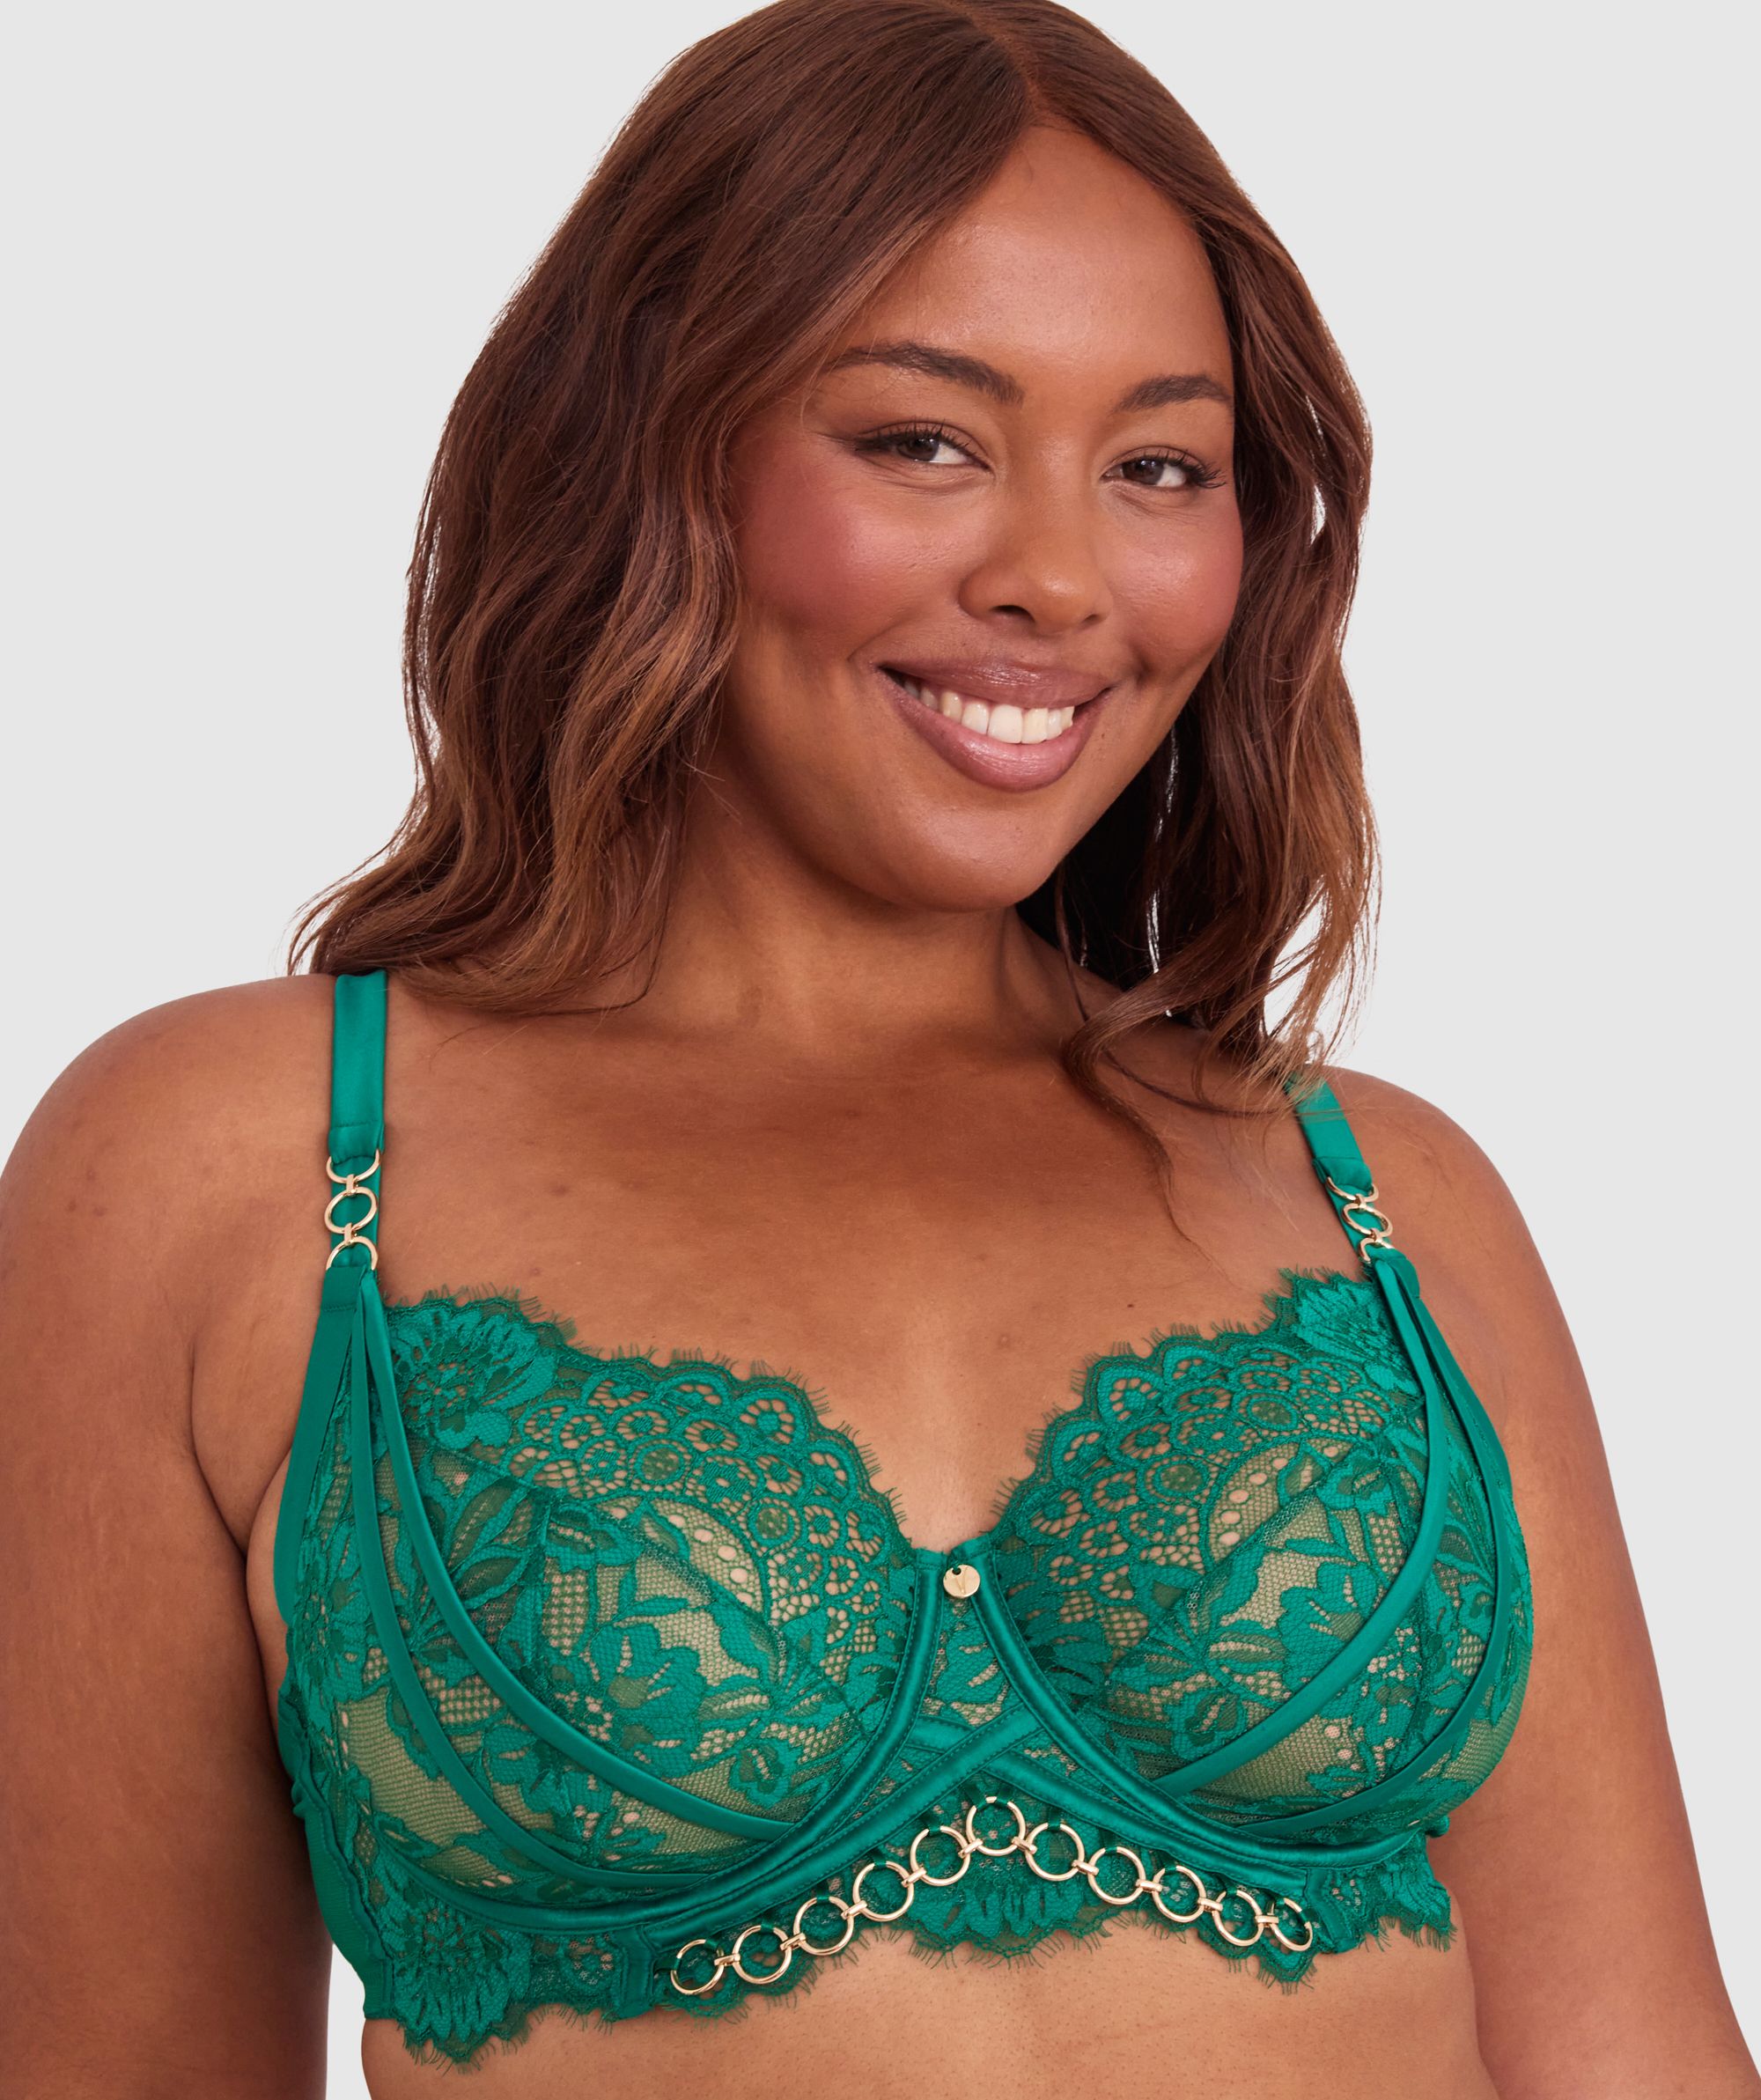 Bras N Things Vamp Ain't No Other Full Cup Underwire Bra - Green